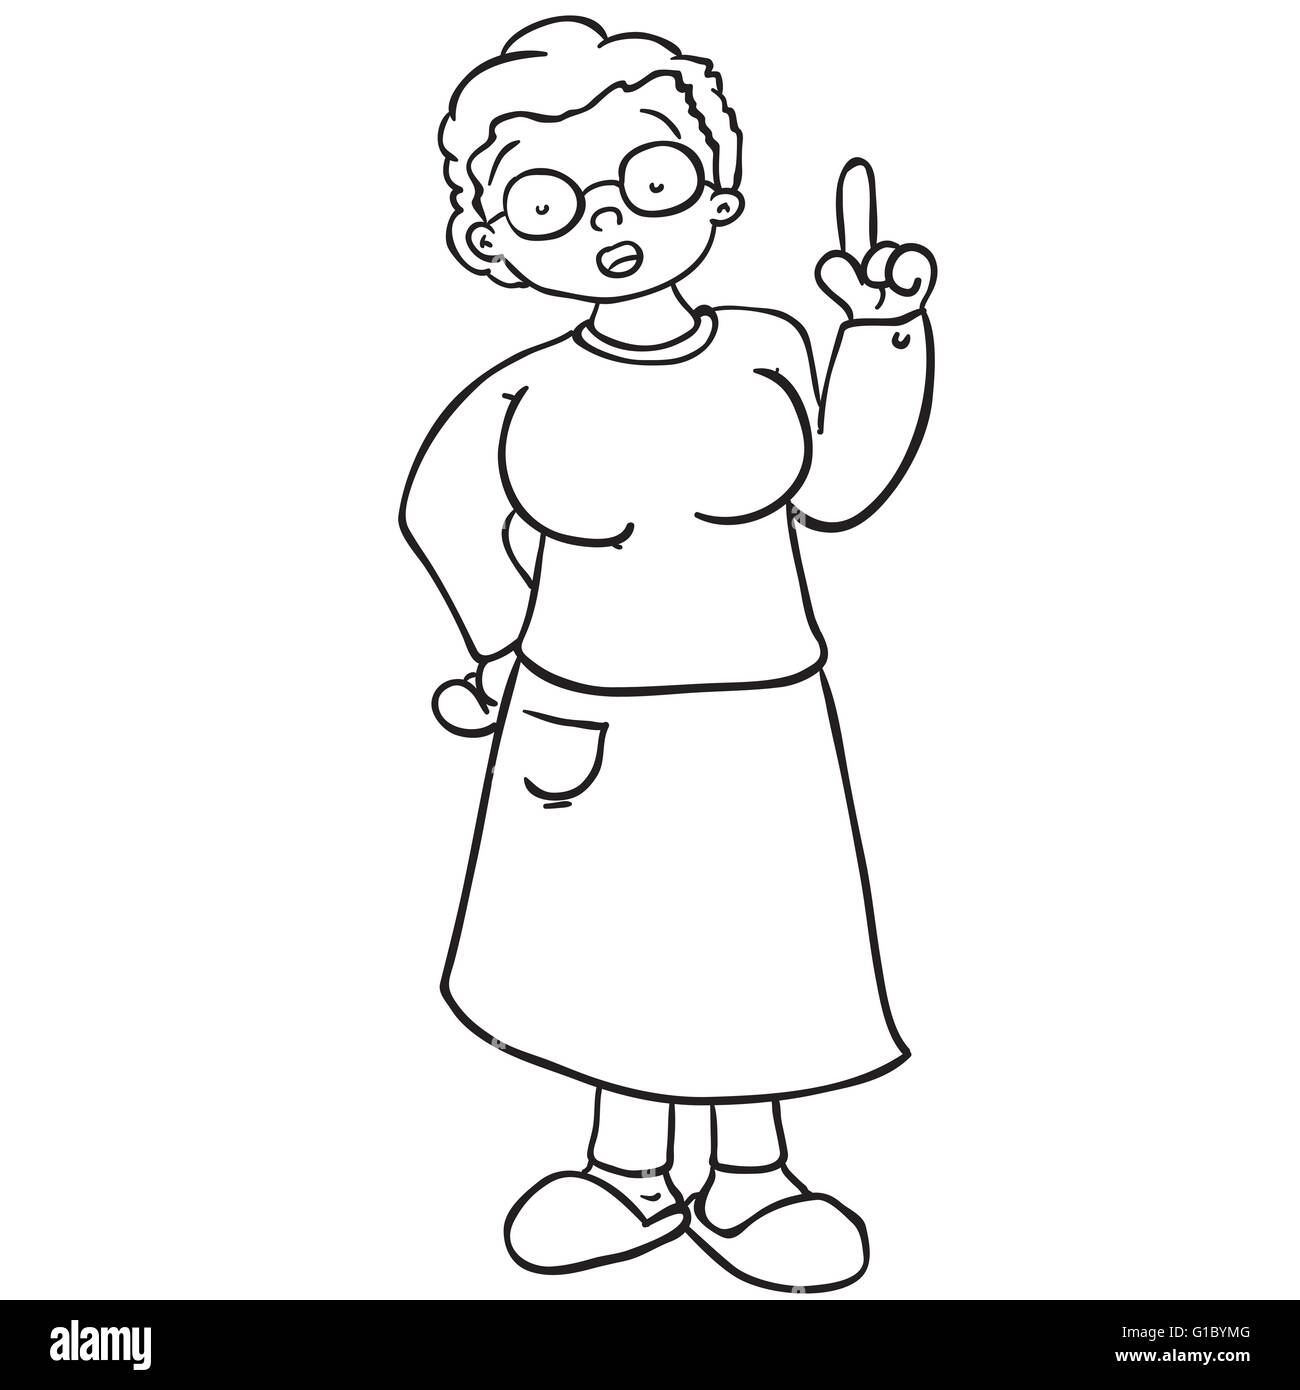 simple black and white grandmother talking cartoon Stock Vector